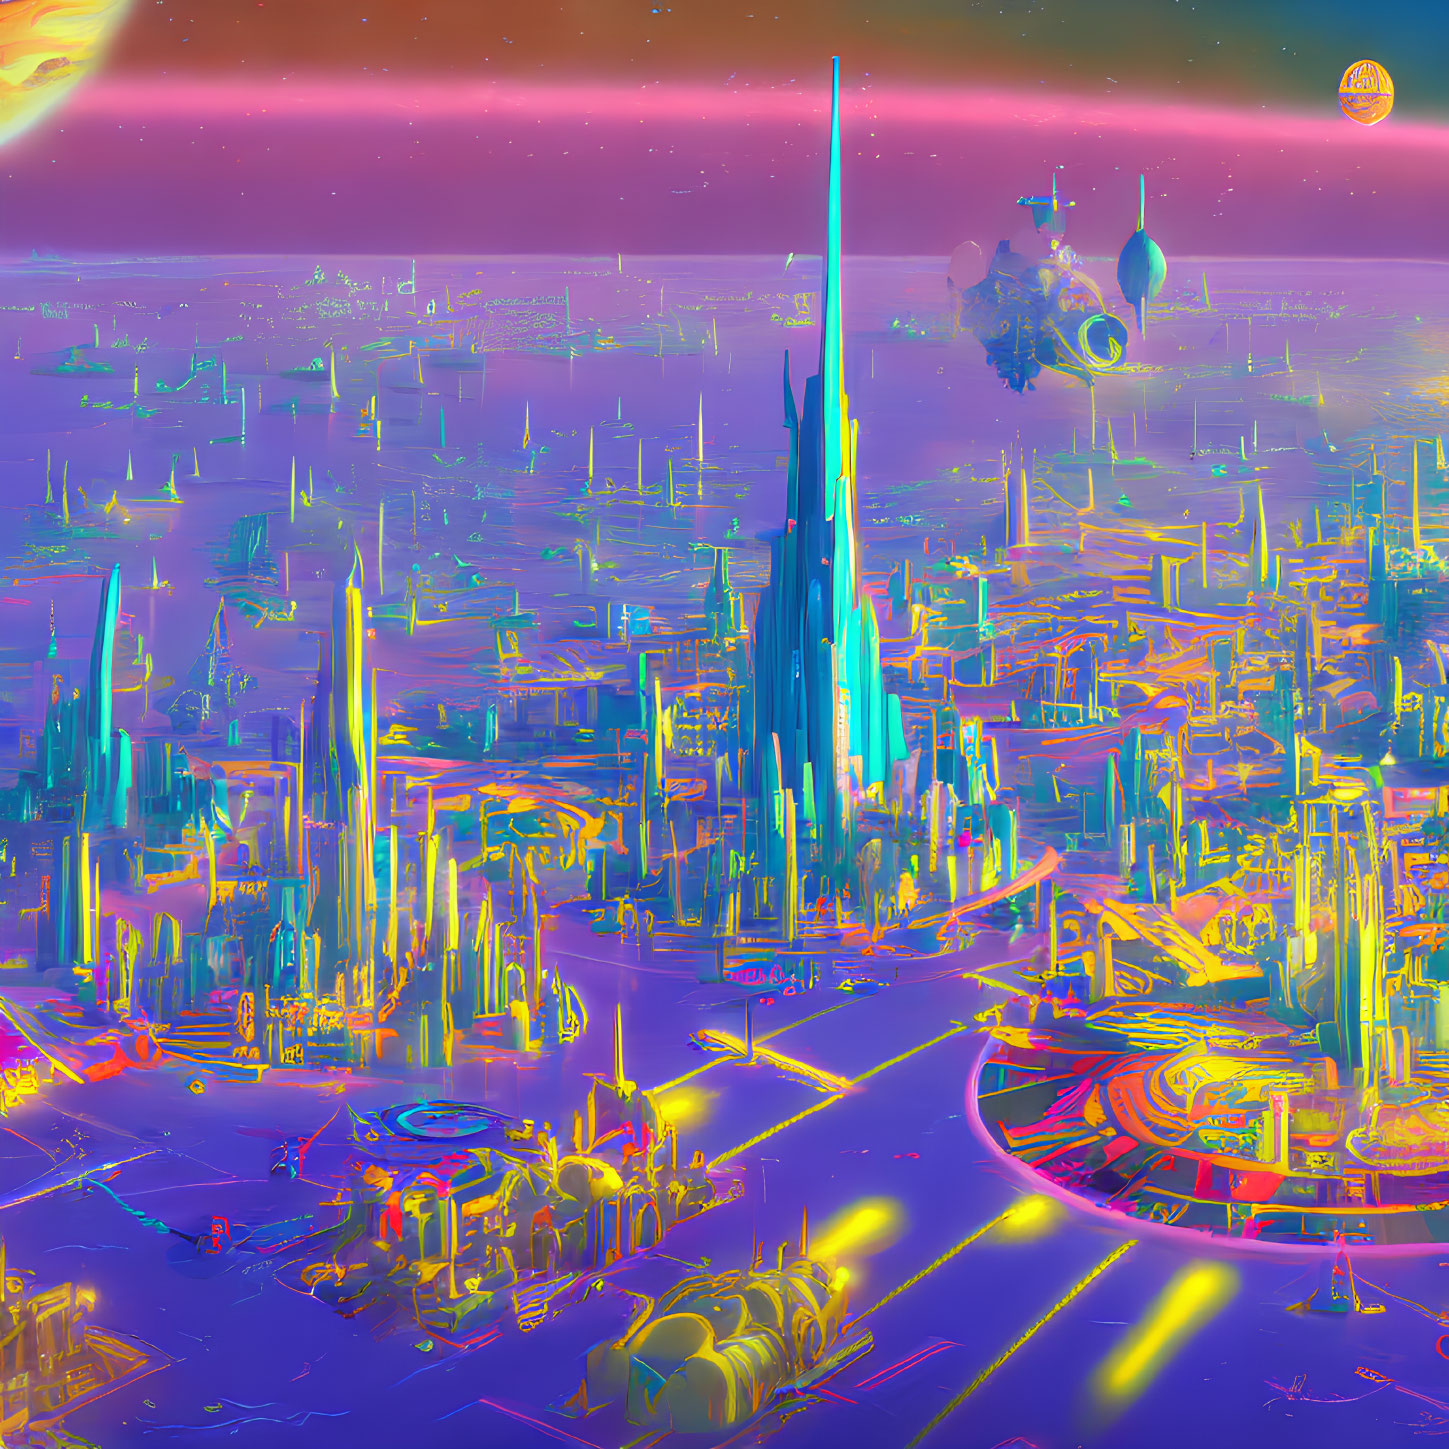 Colorful futuristic cityscape with towering spires and flying objects